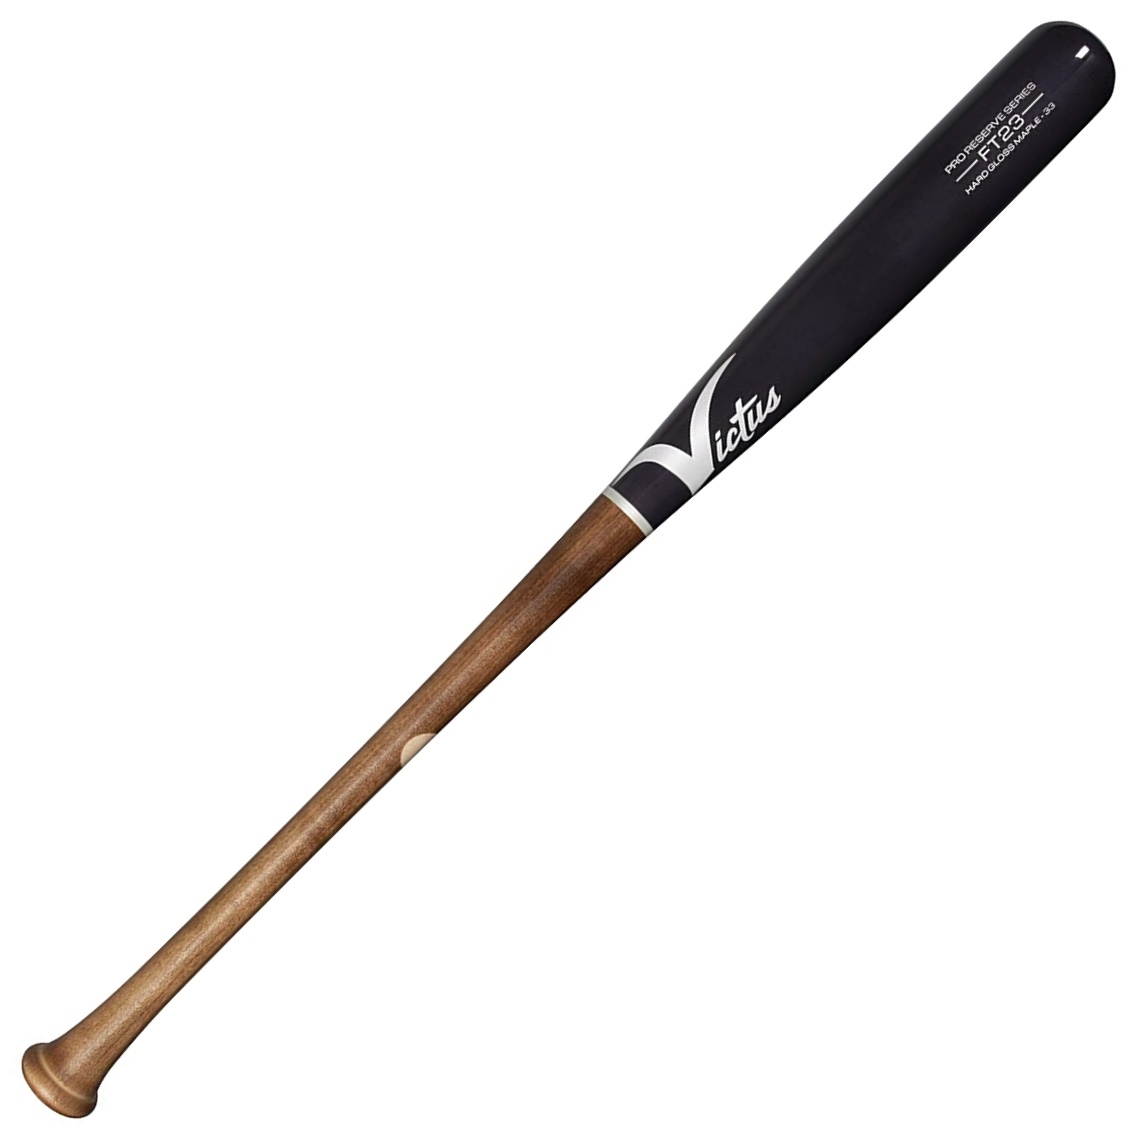 victus-ft23-pro-reserve-maple-wood-baseball-bat-32-inch VRWMFT23-FLCR-32 Victus  The TATIS23 bat is designed for power hitters with an end-loaded